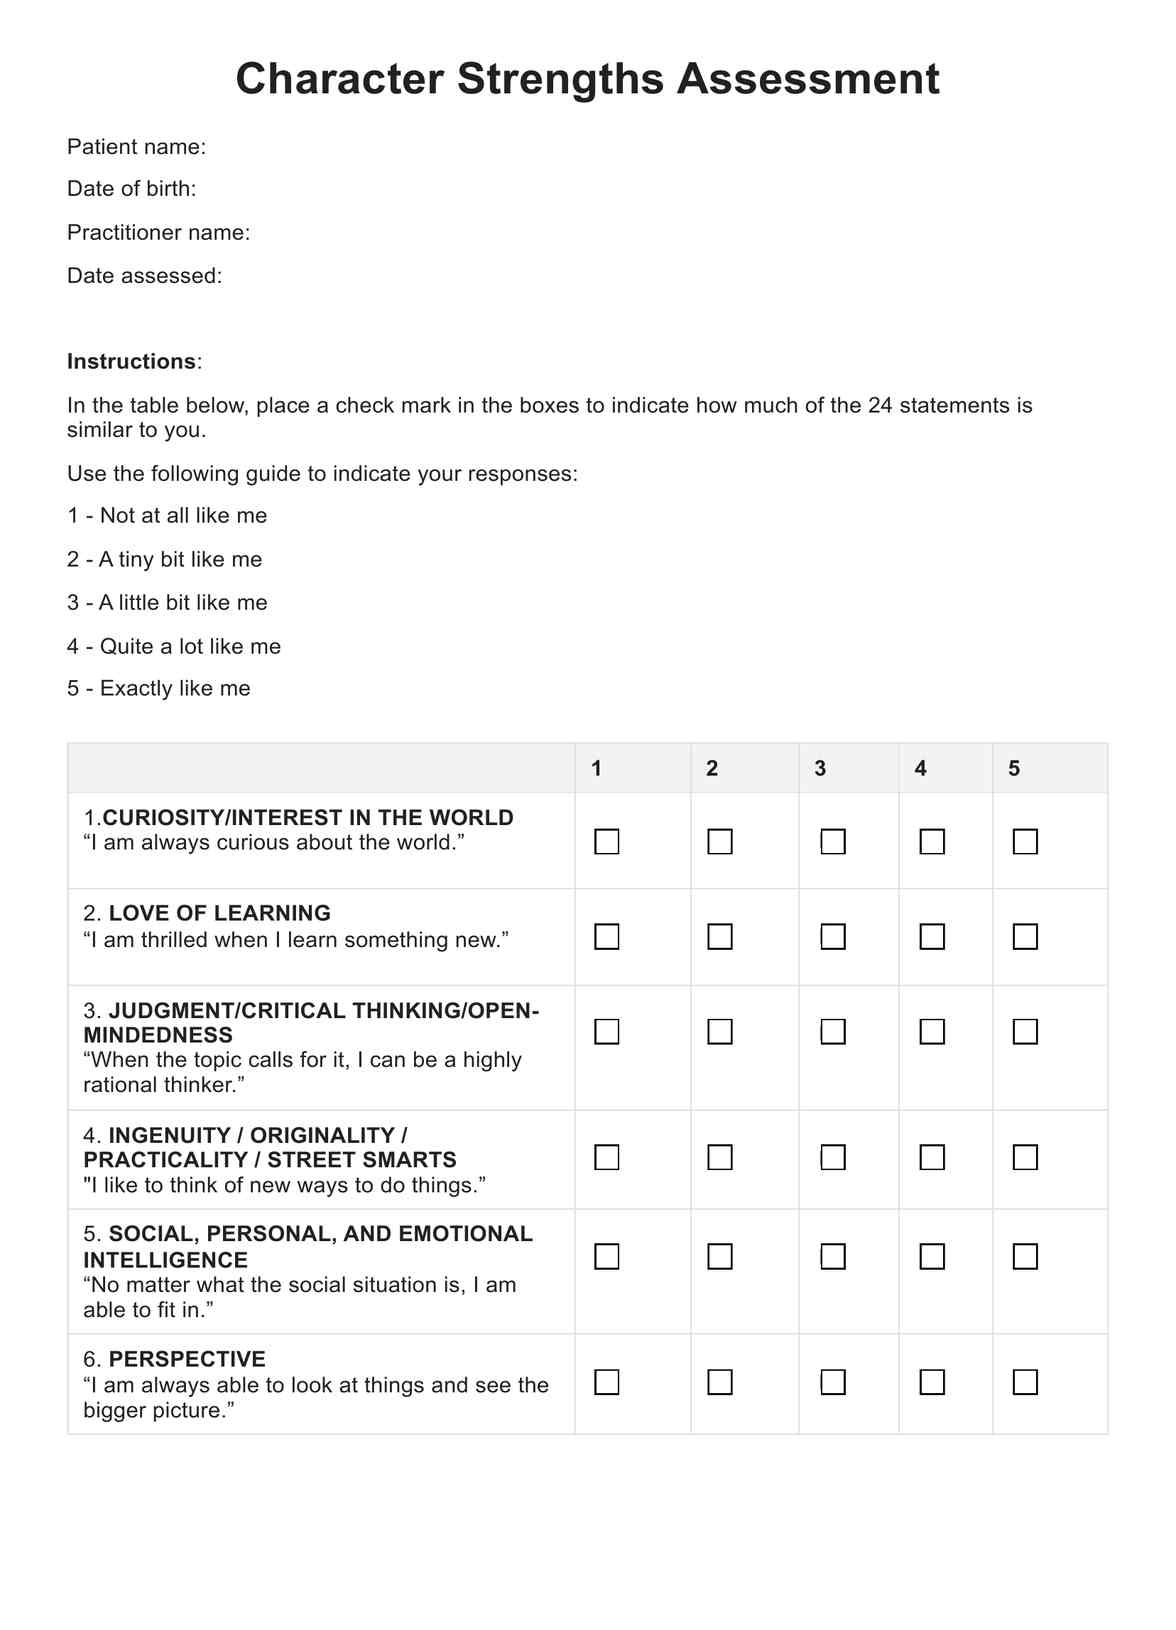 Character Strengths Assessment PDF Example